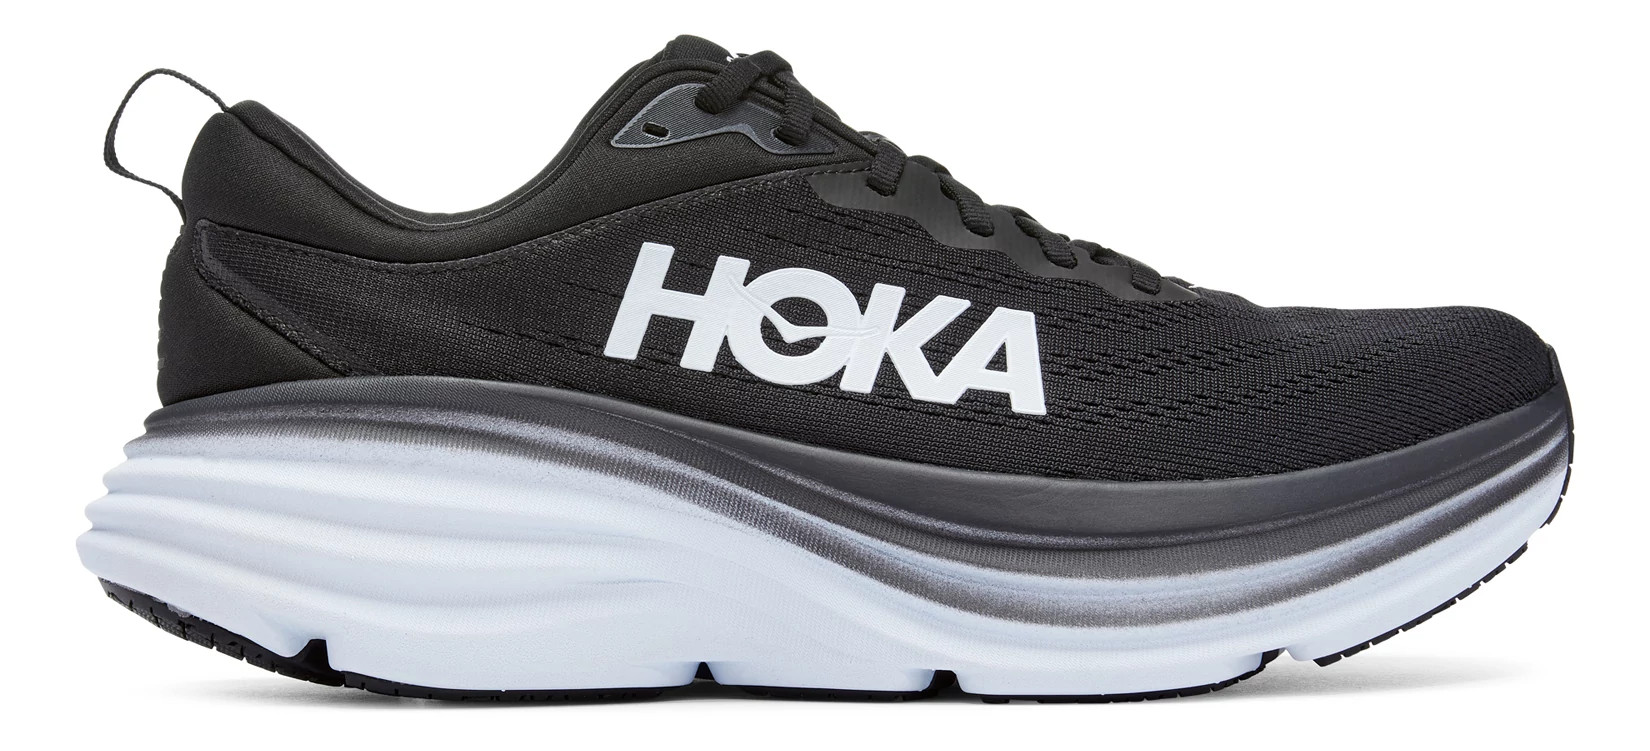 Welcome To Your HOKA Headquarters - Road Runner Sports